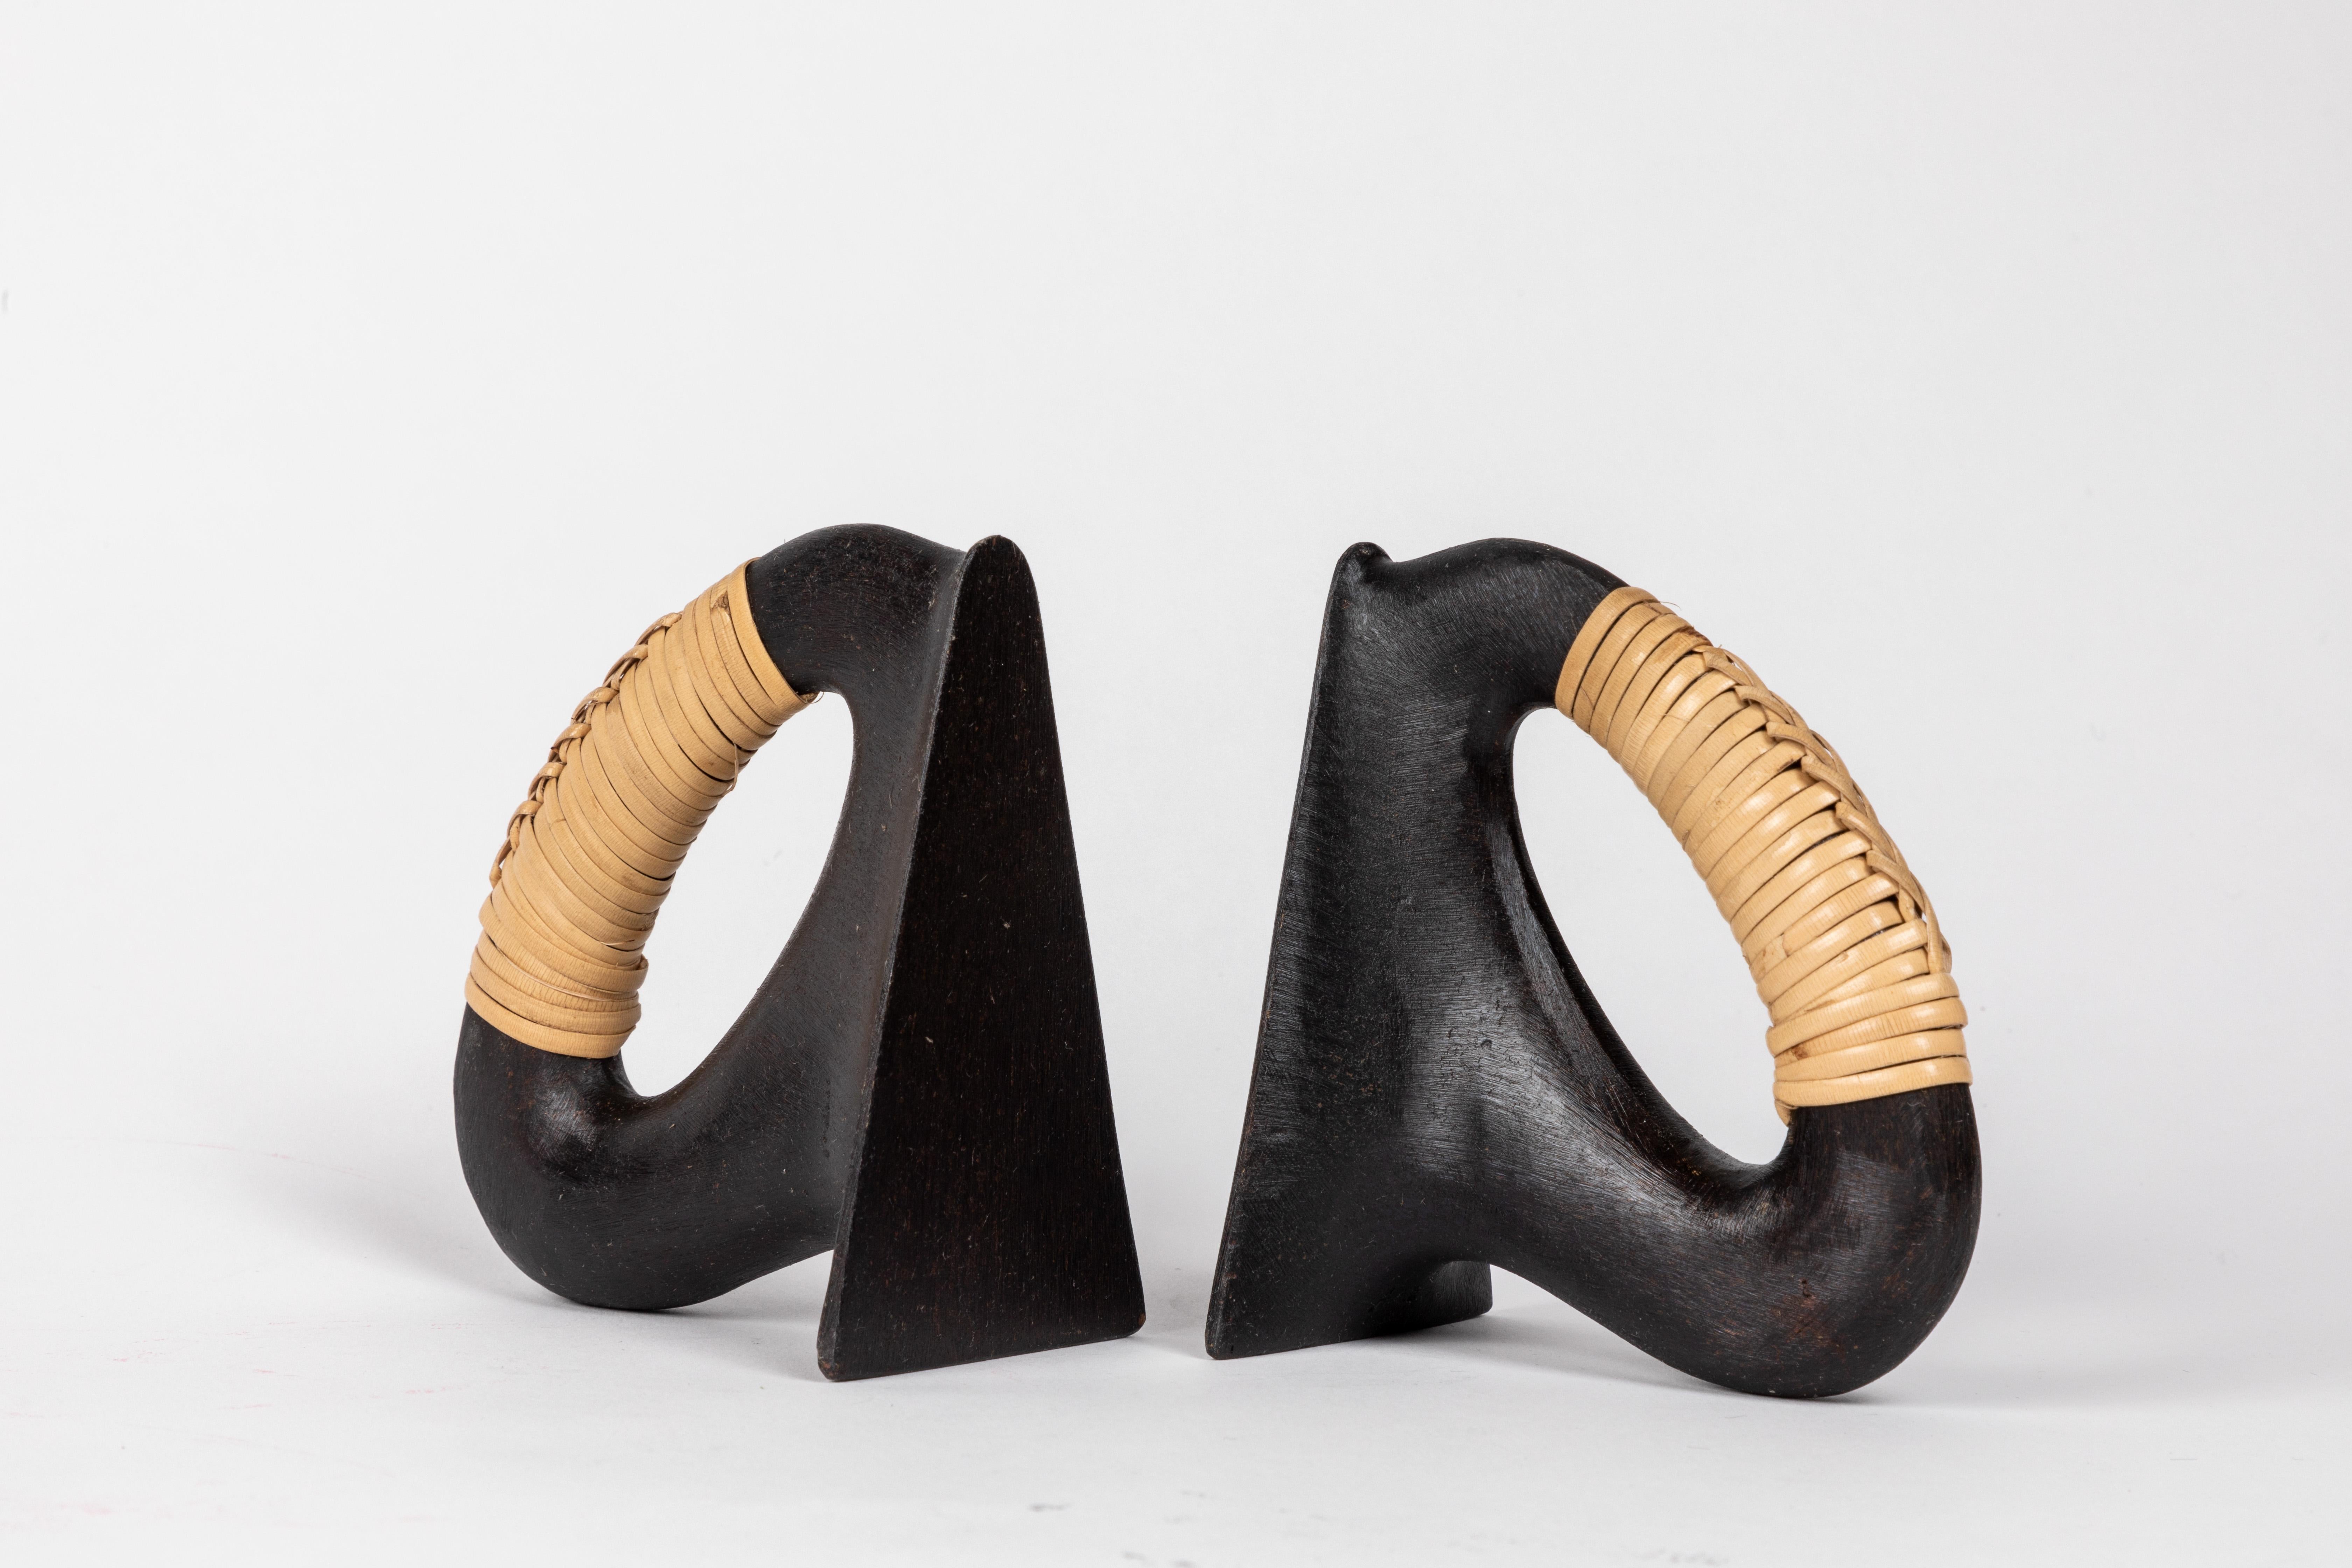 Pair of Carl Auböck model #3530 'Flatiron' patinated brass and cane bookends. Designed in the 1950s, this incredibly refined and sculptural pair of bookends are executed in patinated brass and handwoven cane. 

Price is for the pair. One pair in